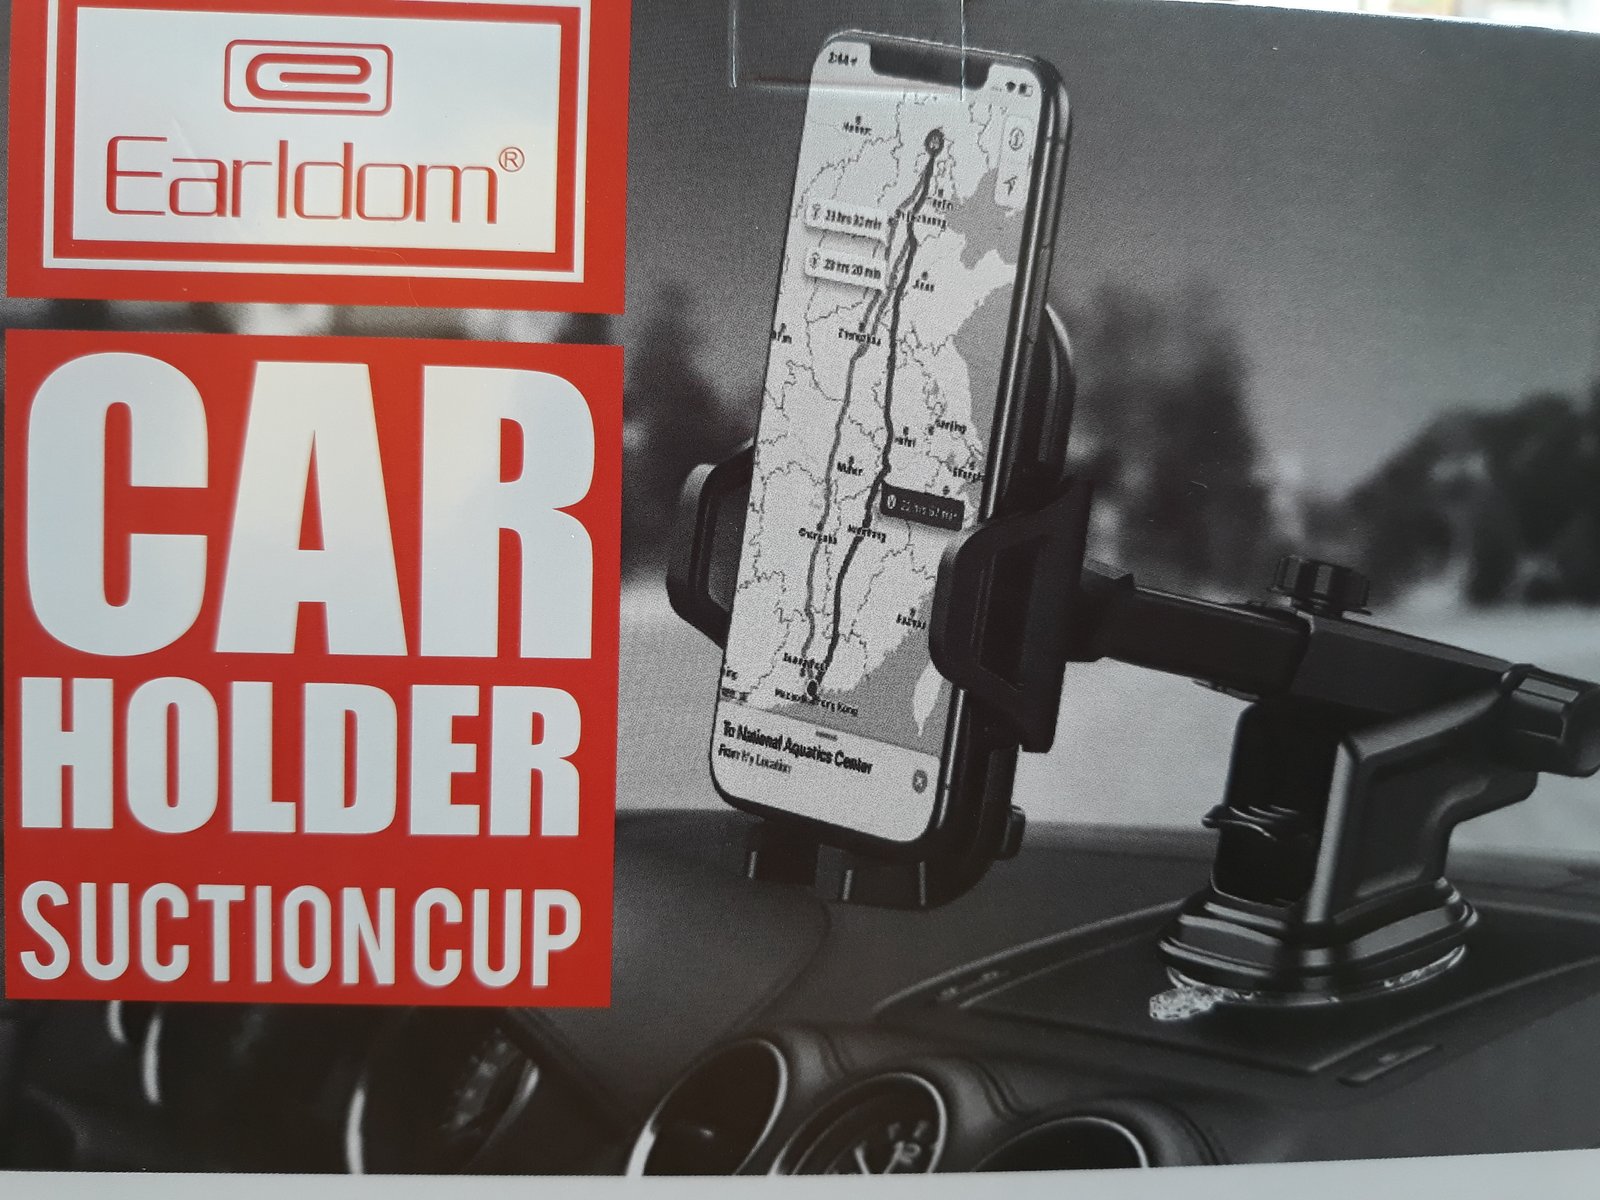 Earldom Car Holder Suction cup ET- EH59